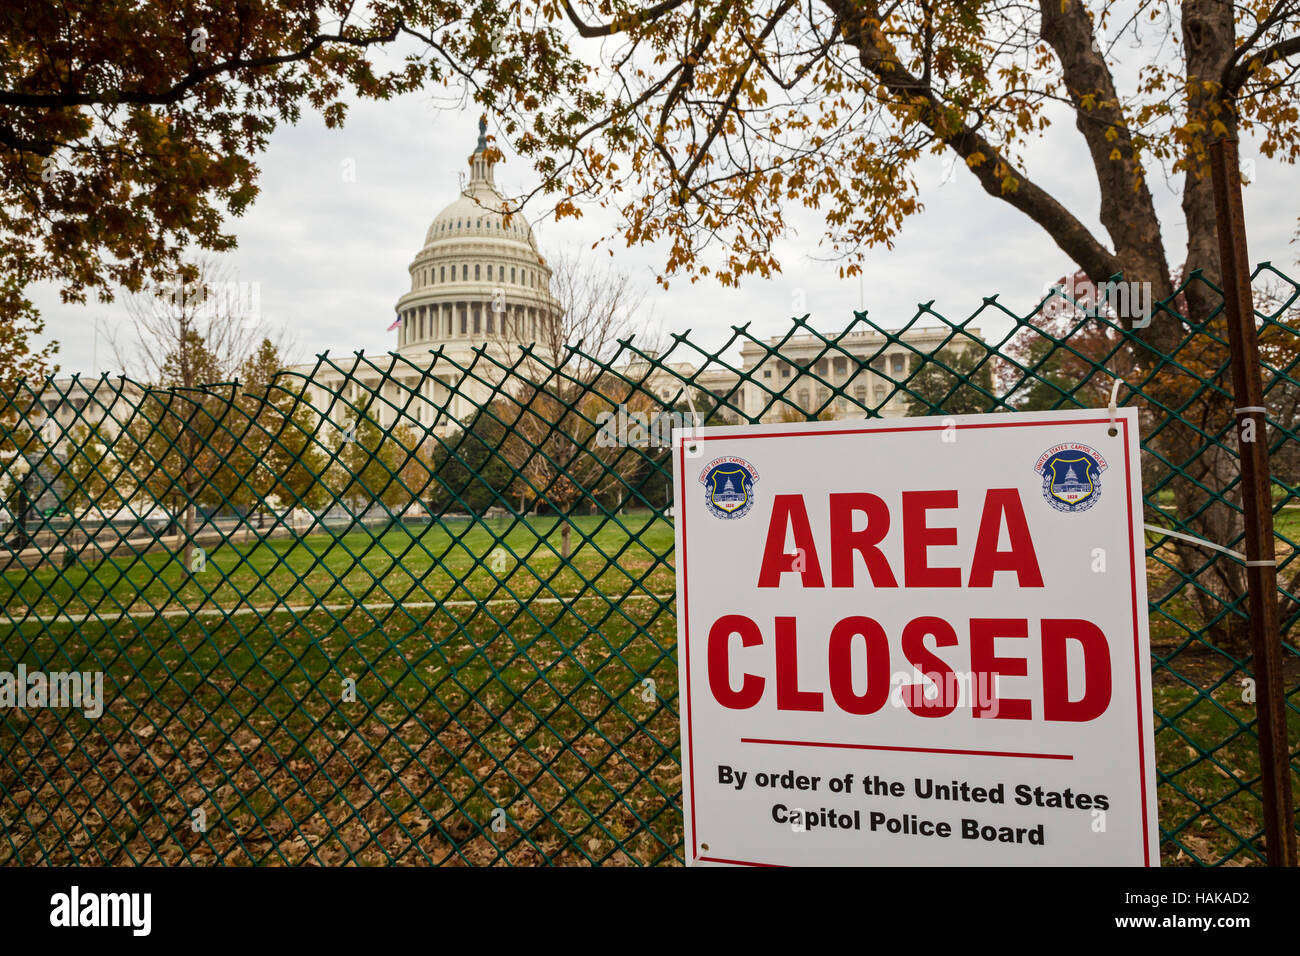 Washington, DC - The west lawn of the U.S. Capitol building is closed while workers build a platform for the inauguration of U.S. President-elect Dona Stock Photo